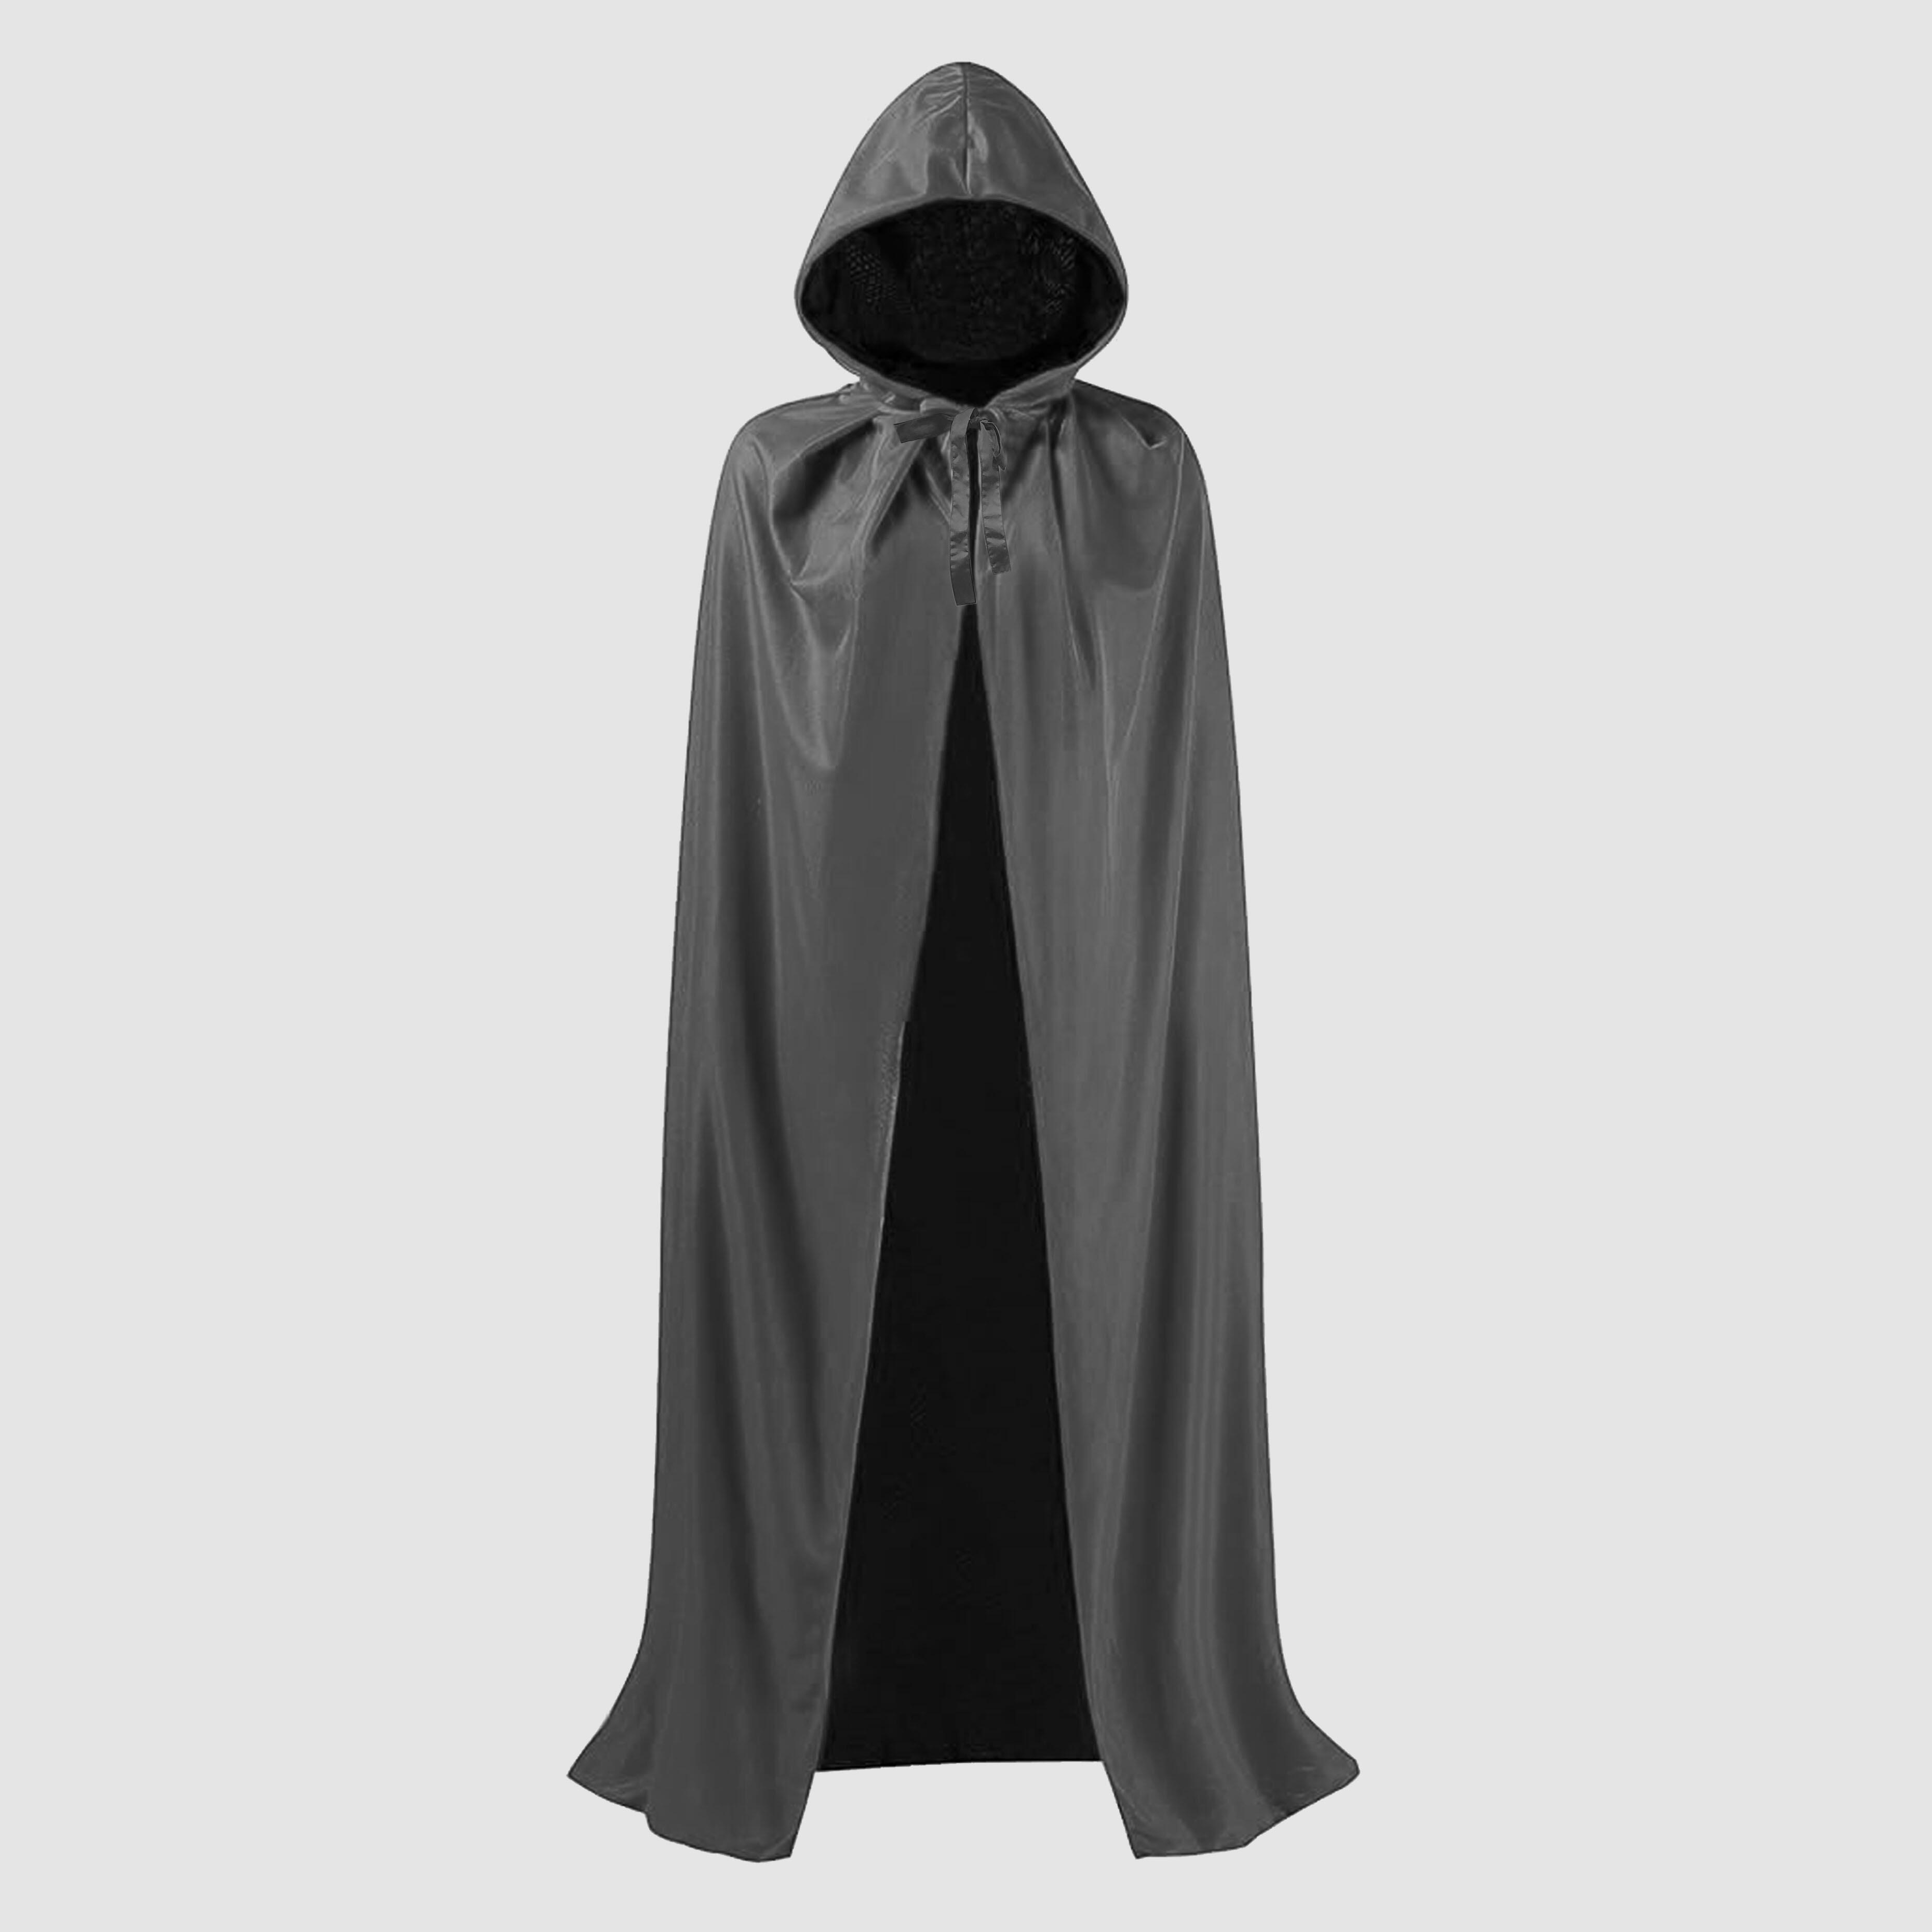 Nibano Hooded Show Gown Dark Grey